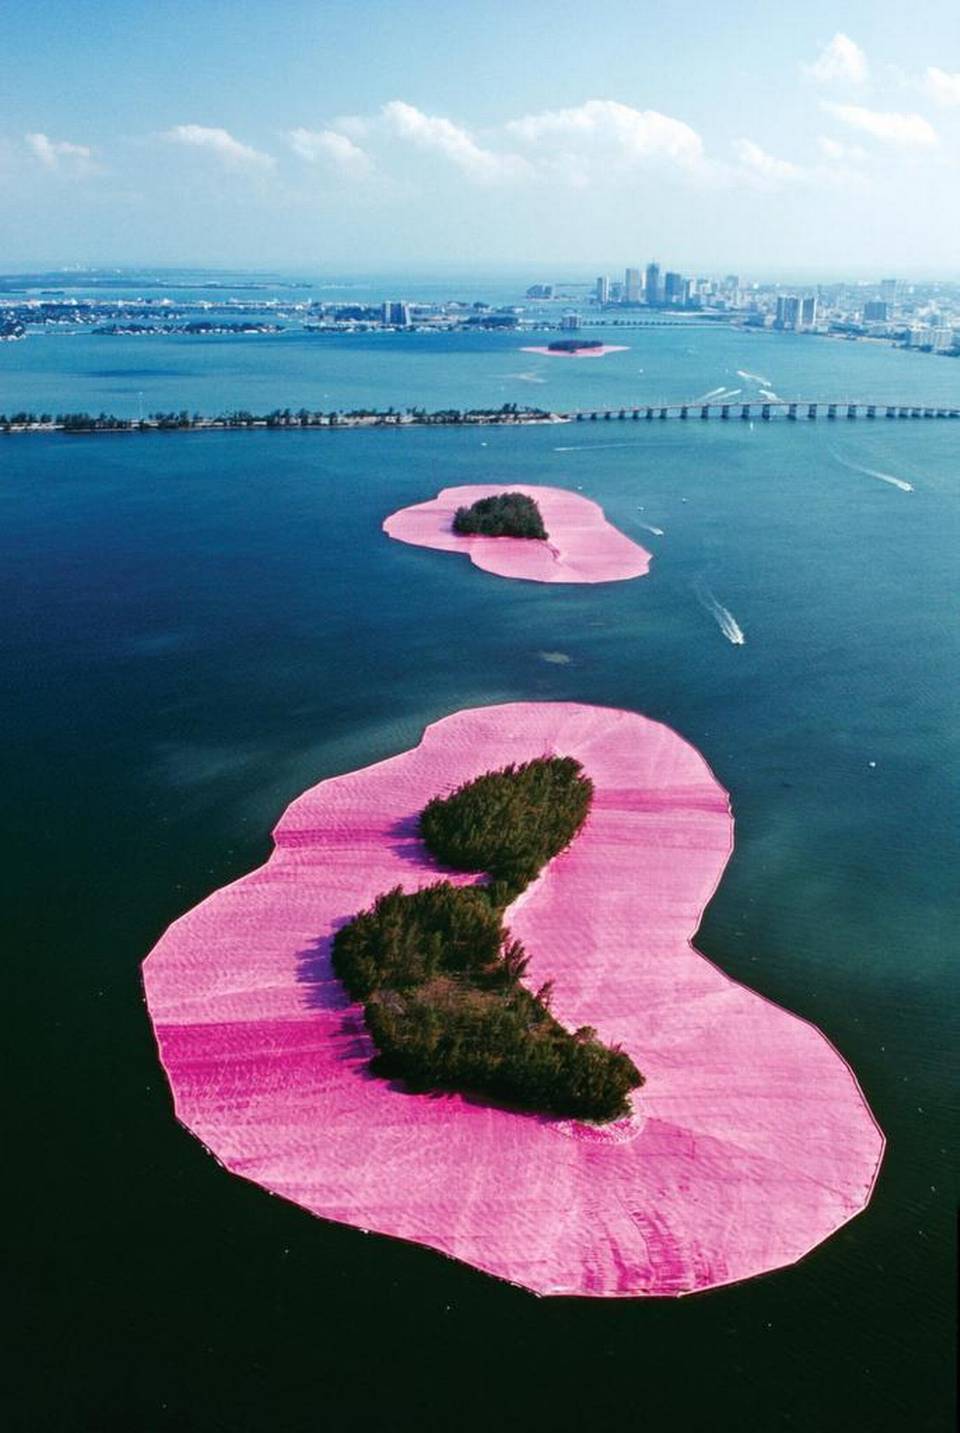 Ruth Shack championed Christo and Jeanne-Claude’s "Surrounded Islands" Biscayne Bay, Miami, FL, 1980-83 (photo by Wolfgang Volz; provided courtesy of the Lowe Art Museum) (Copyright Christo, 1984)